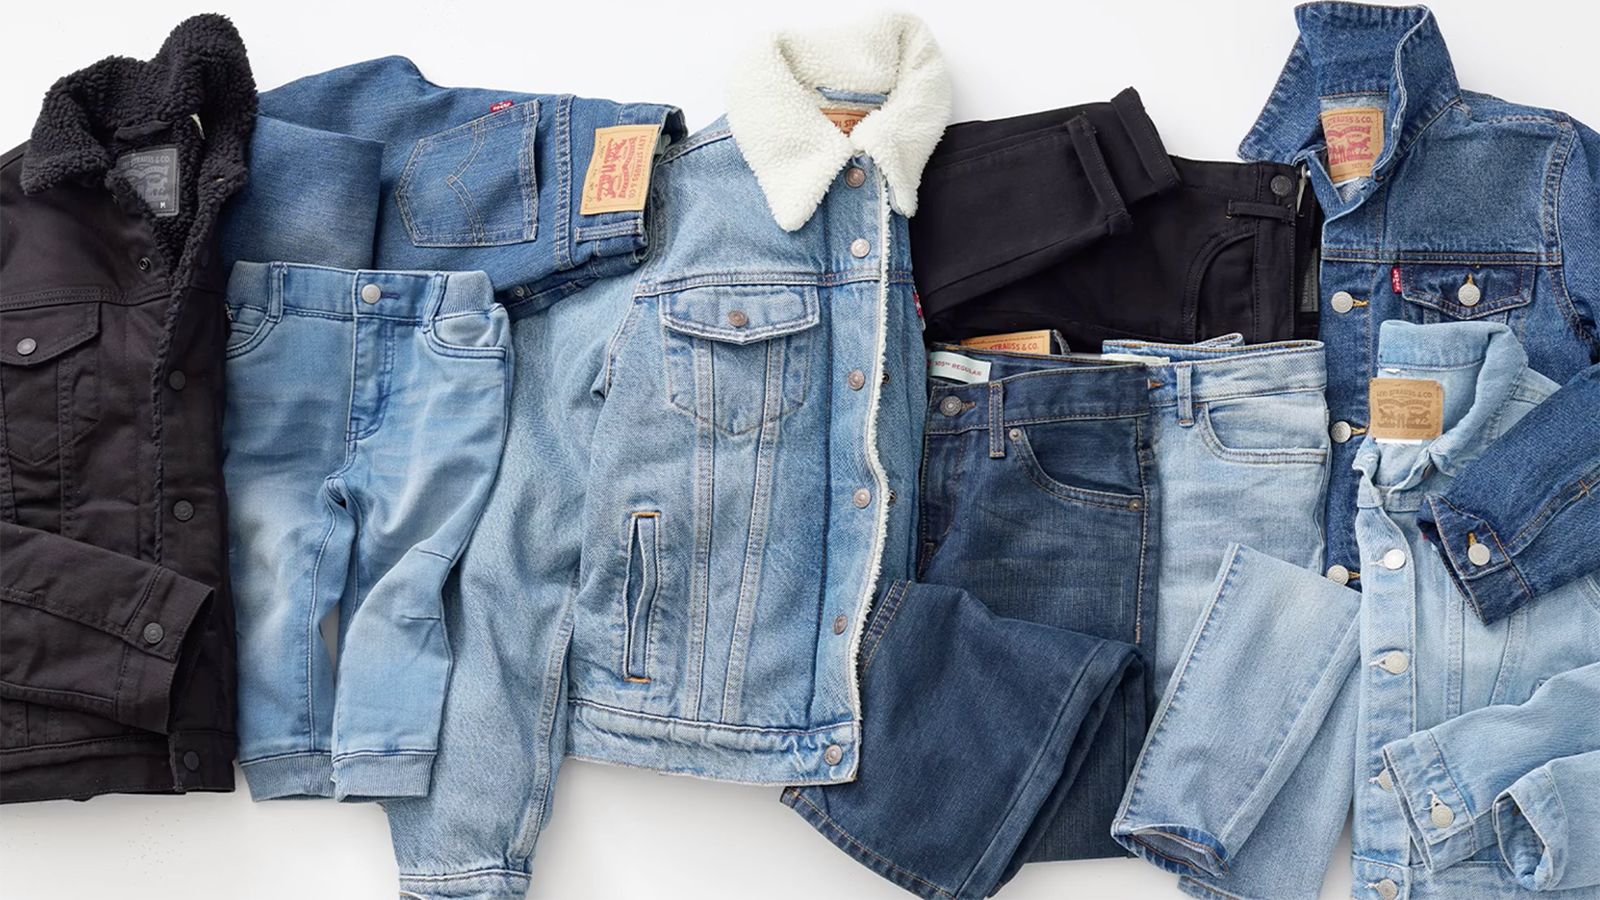 Levi's sale: Take 40% off jeans, jackets and more CNN Underscored